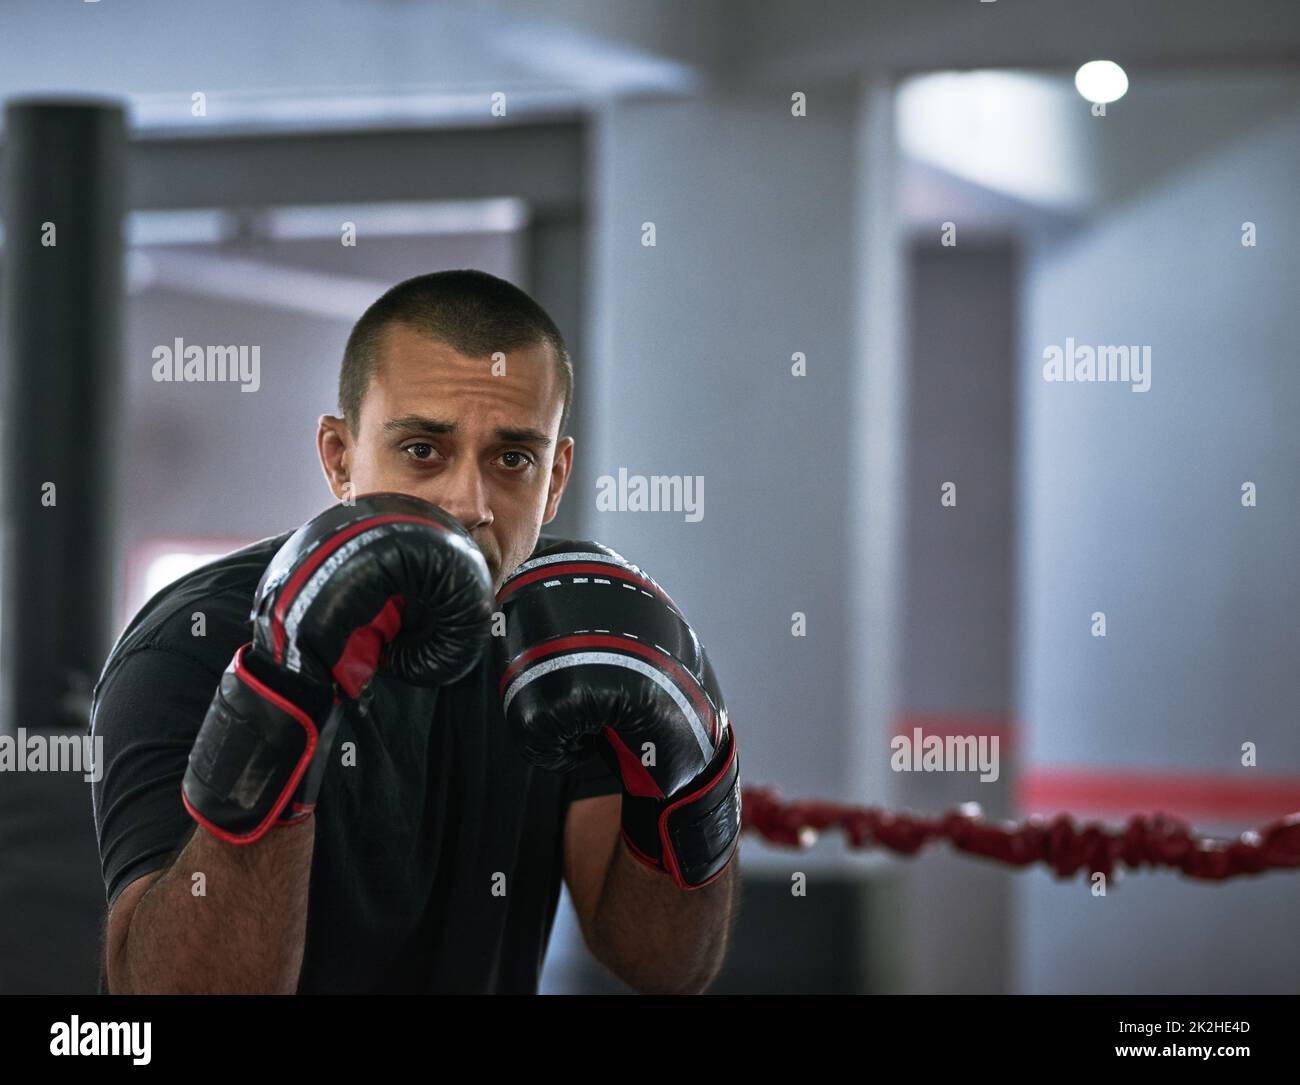 Working on his form. Cropped portrait of a young male athlete training inside a boxing ring. Stock Photo